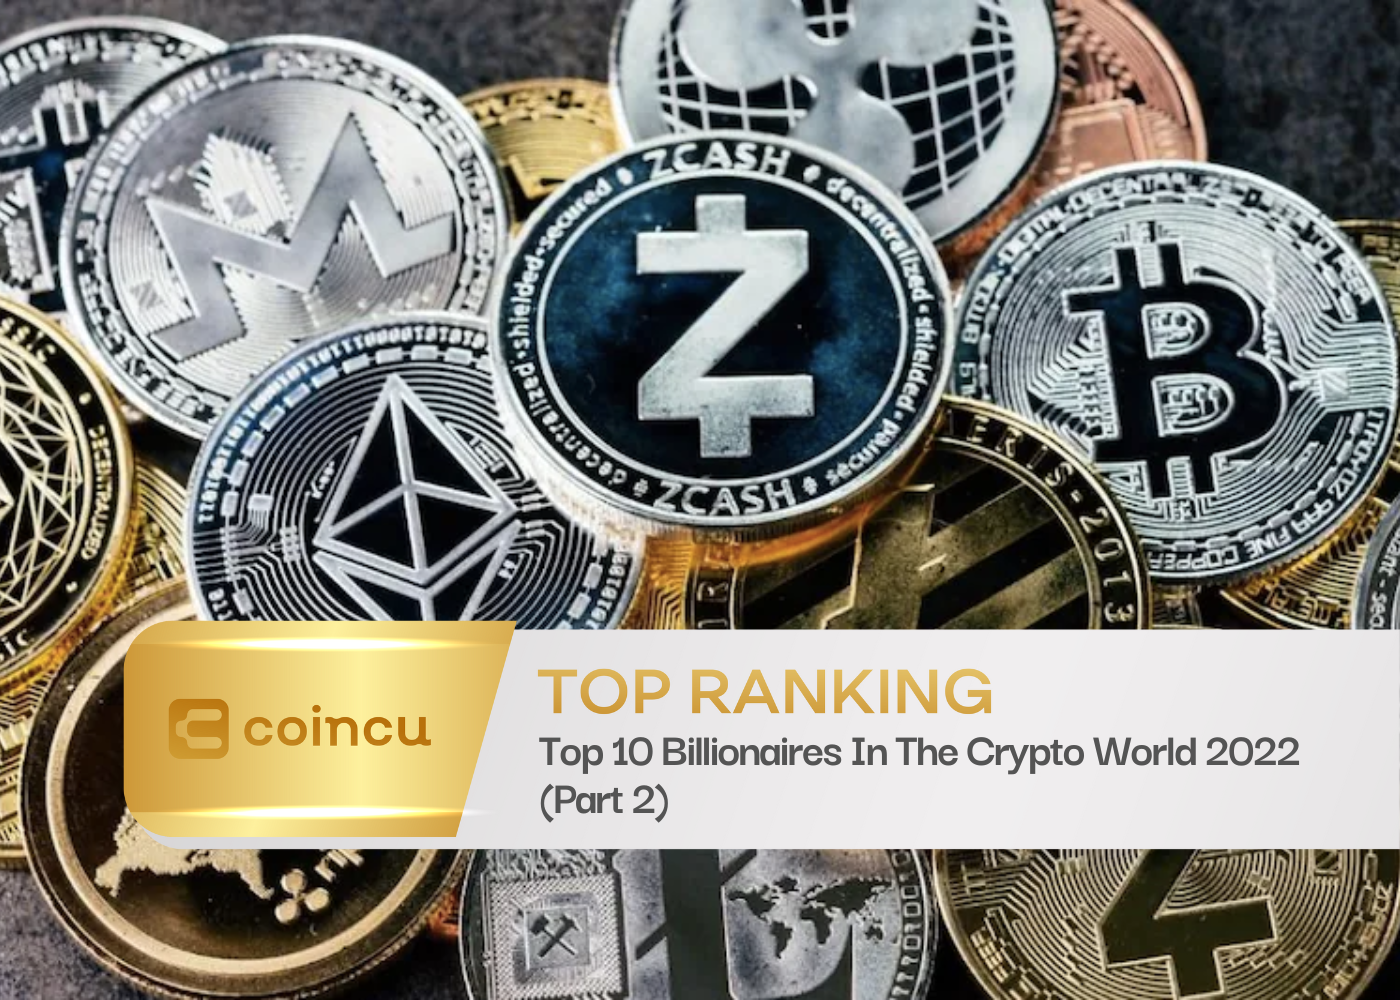 Top 10 Billionaires In The Crypto World 2022 (Part 2)